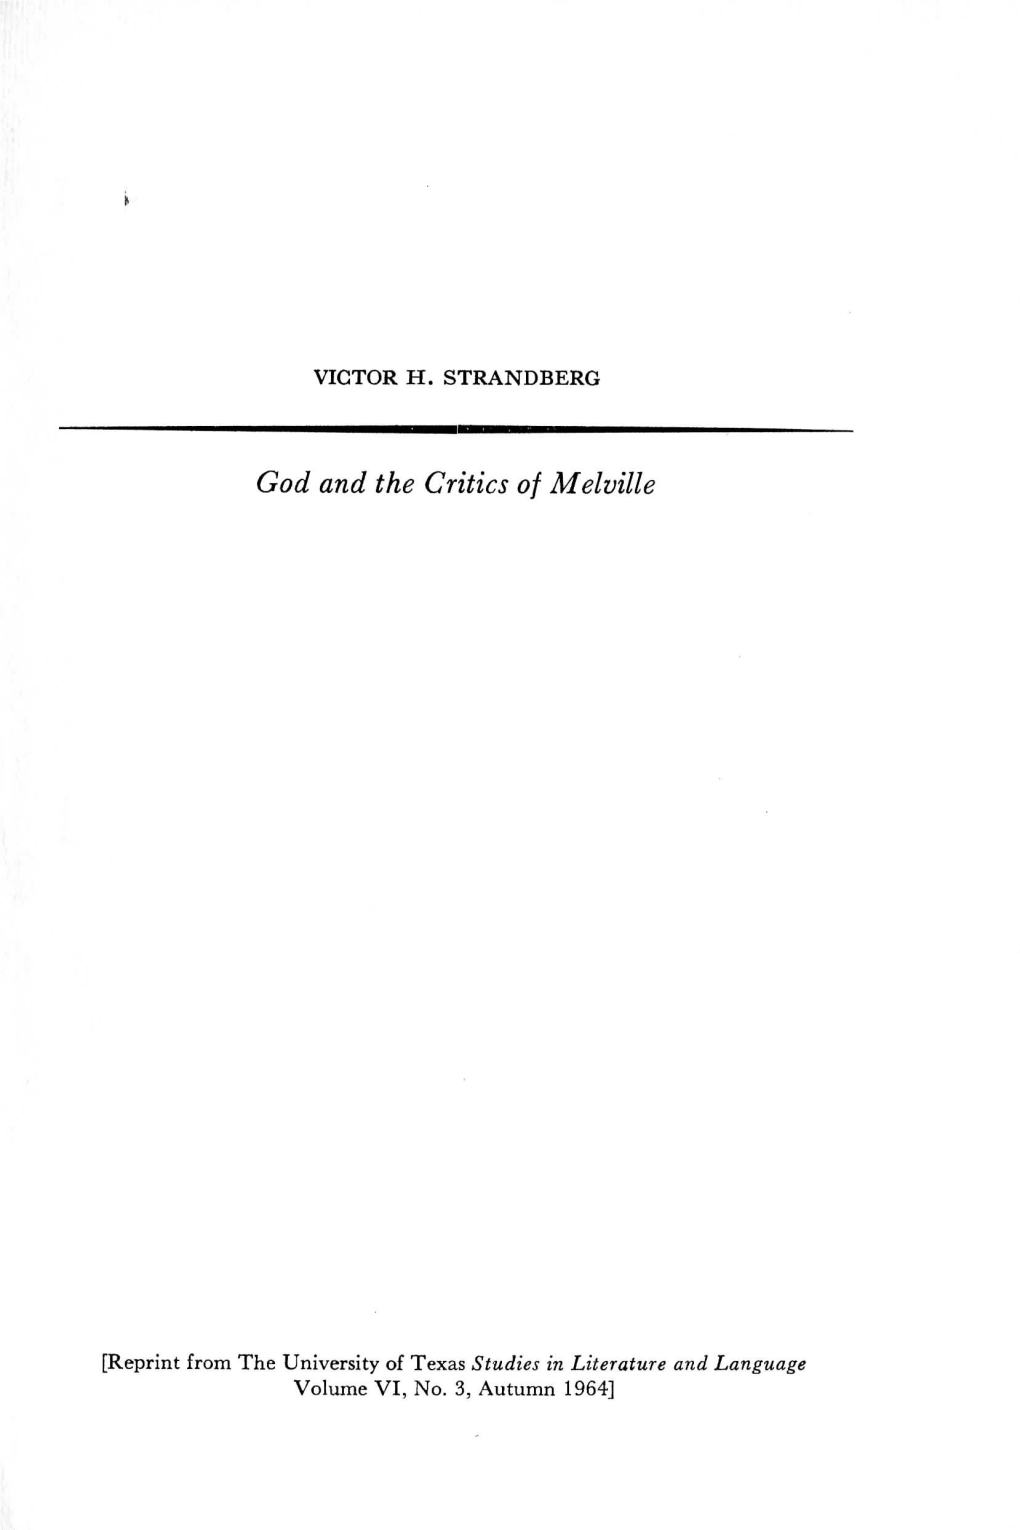 God and the Critics of Melville